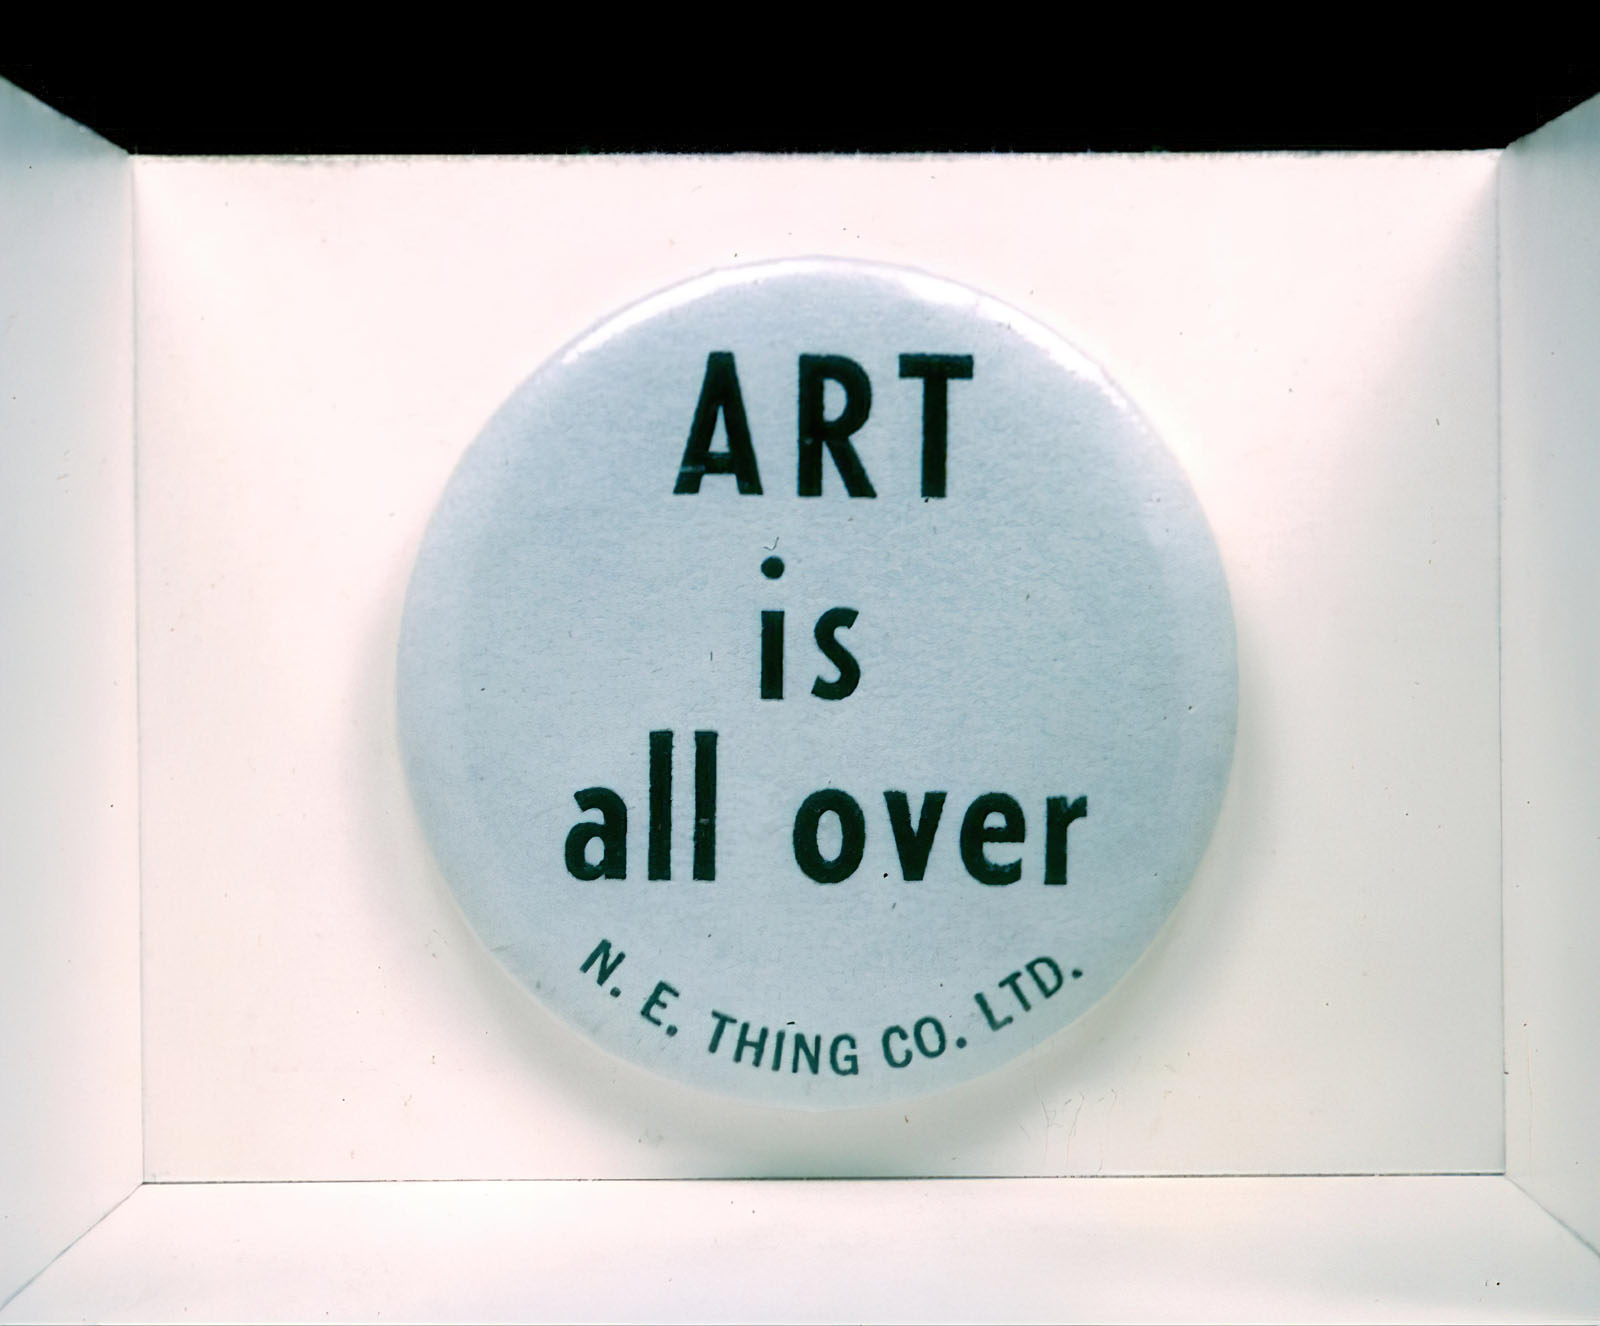 N.E. Thing Co. Ltd. (Iain Baxter) - Art is all over